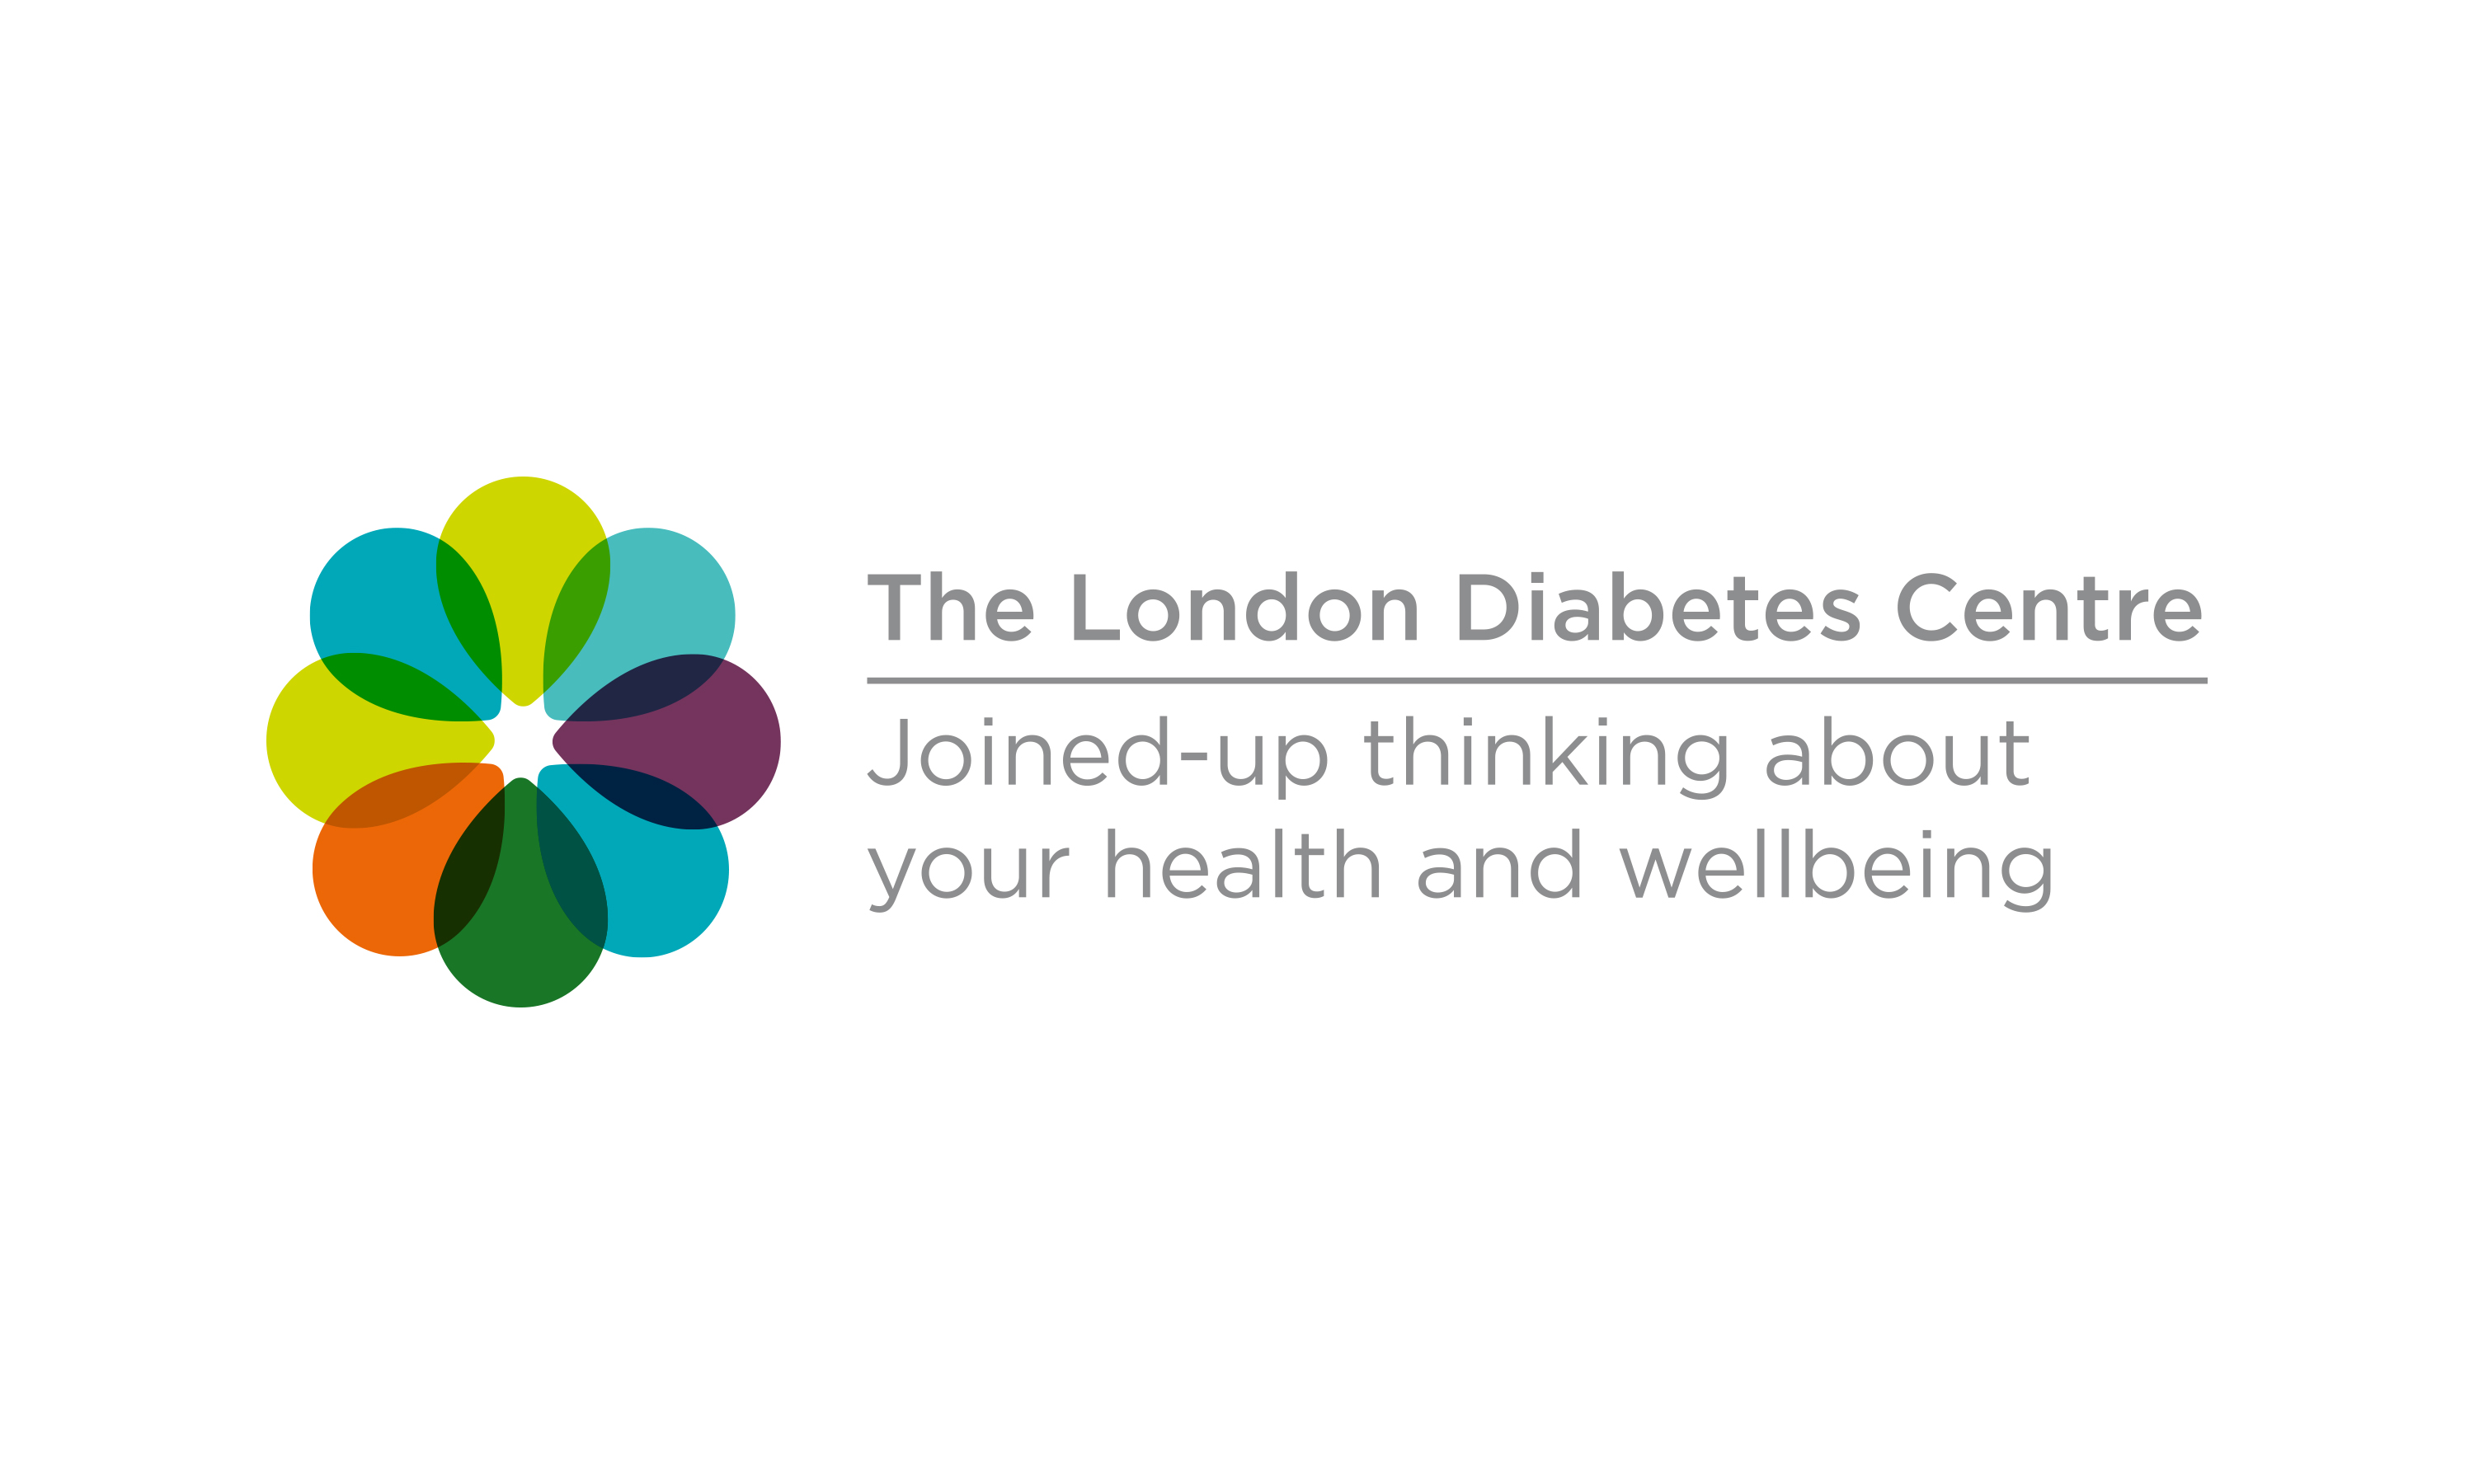 The London Diabetes Centre brand mark by Neon